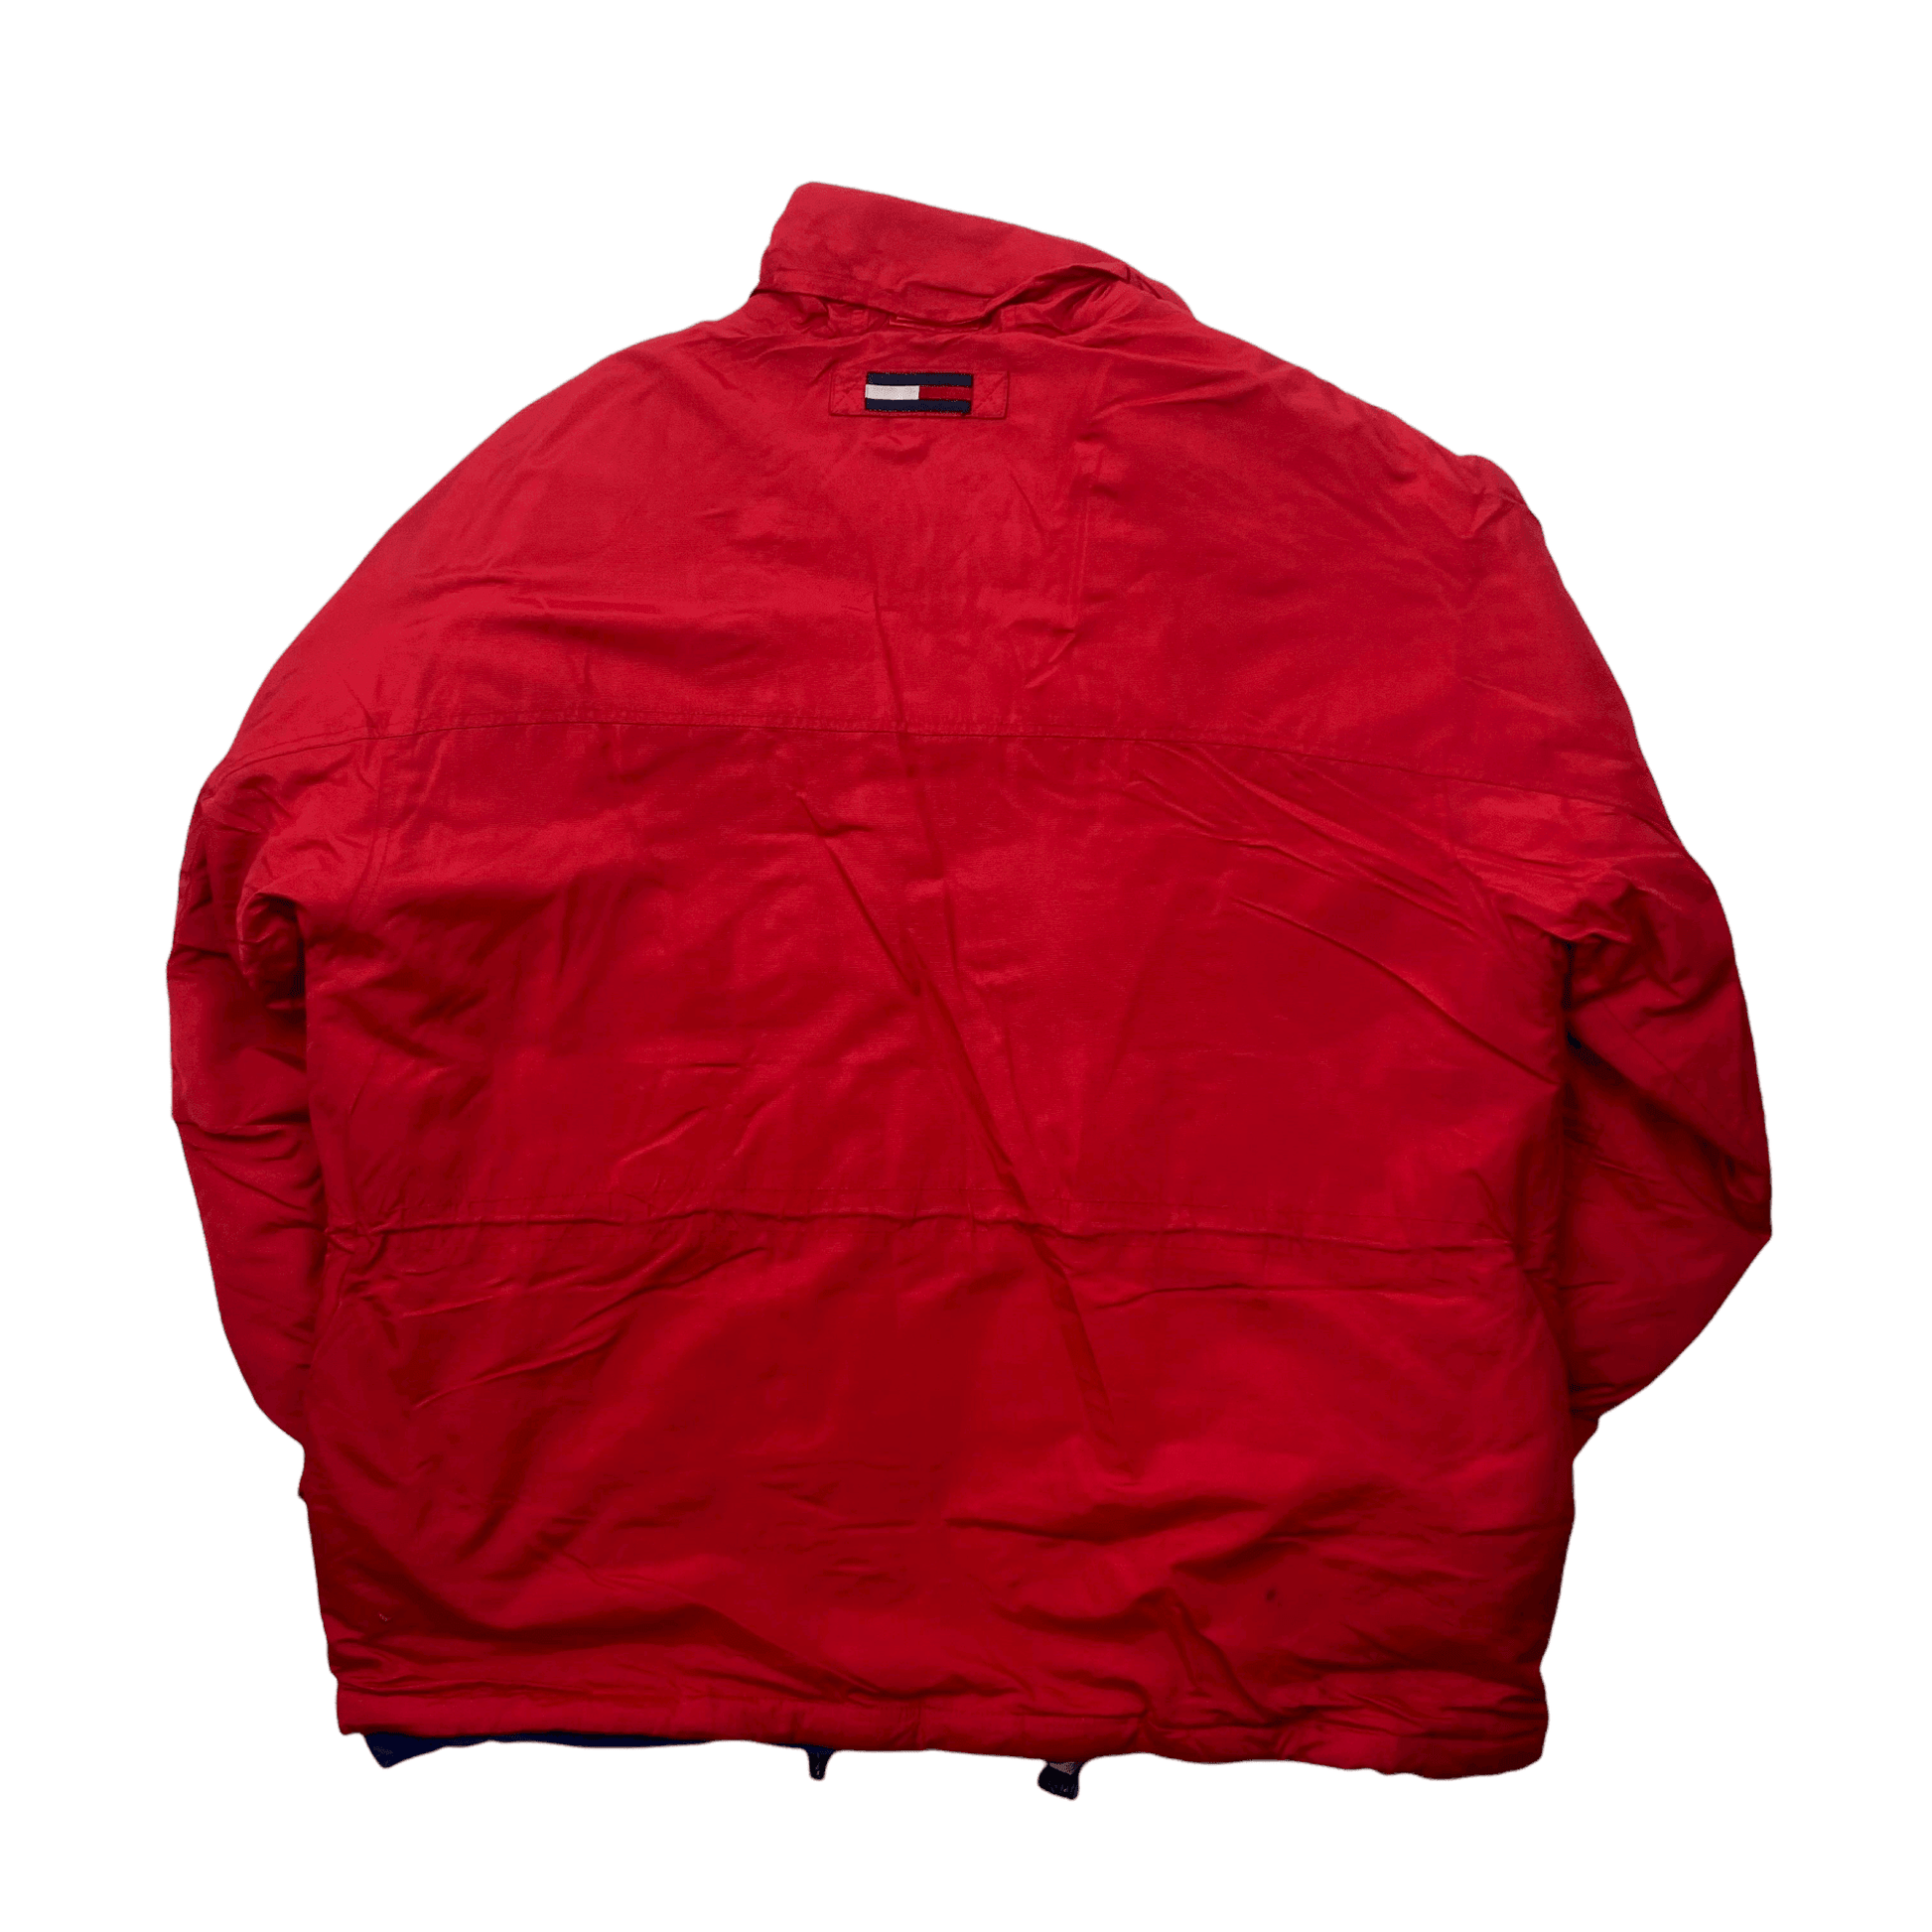 Vintage 90s Red Tommy Hilfiger Spell-Out Puffer Coat/ Jacket - Extra Large - The Streetwear Studio